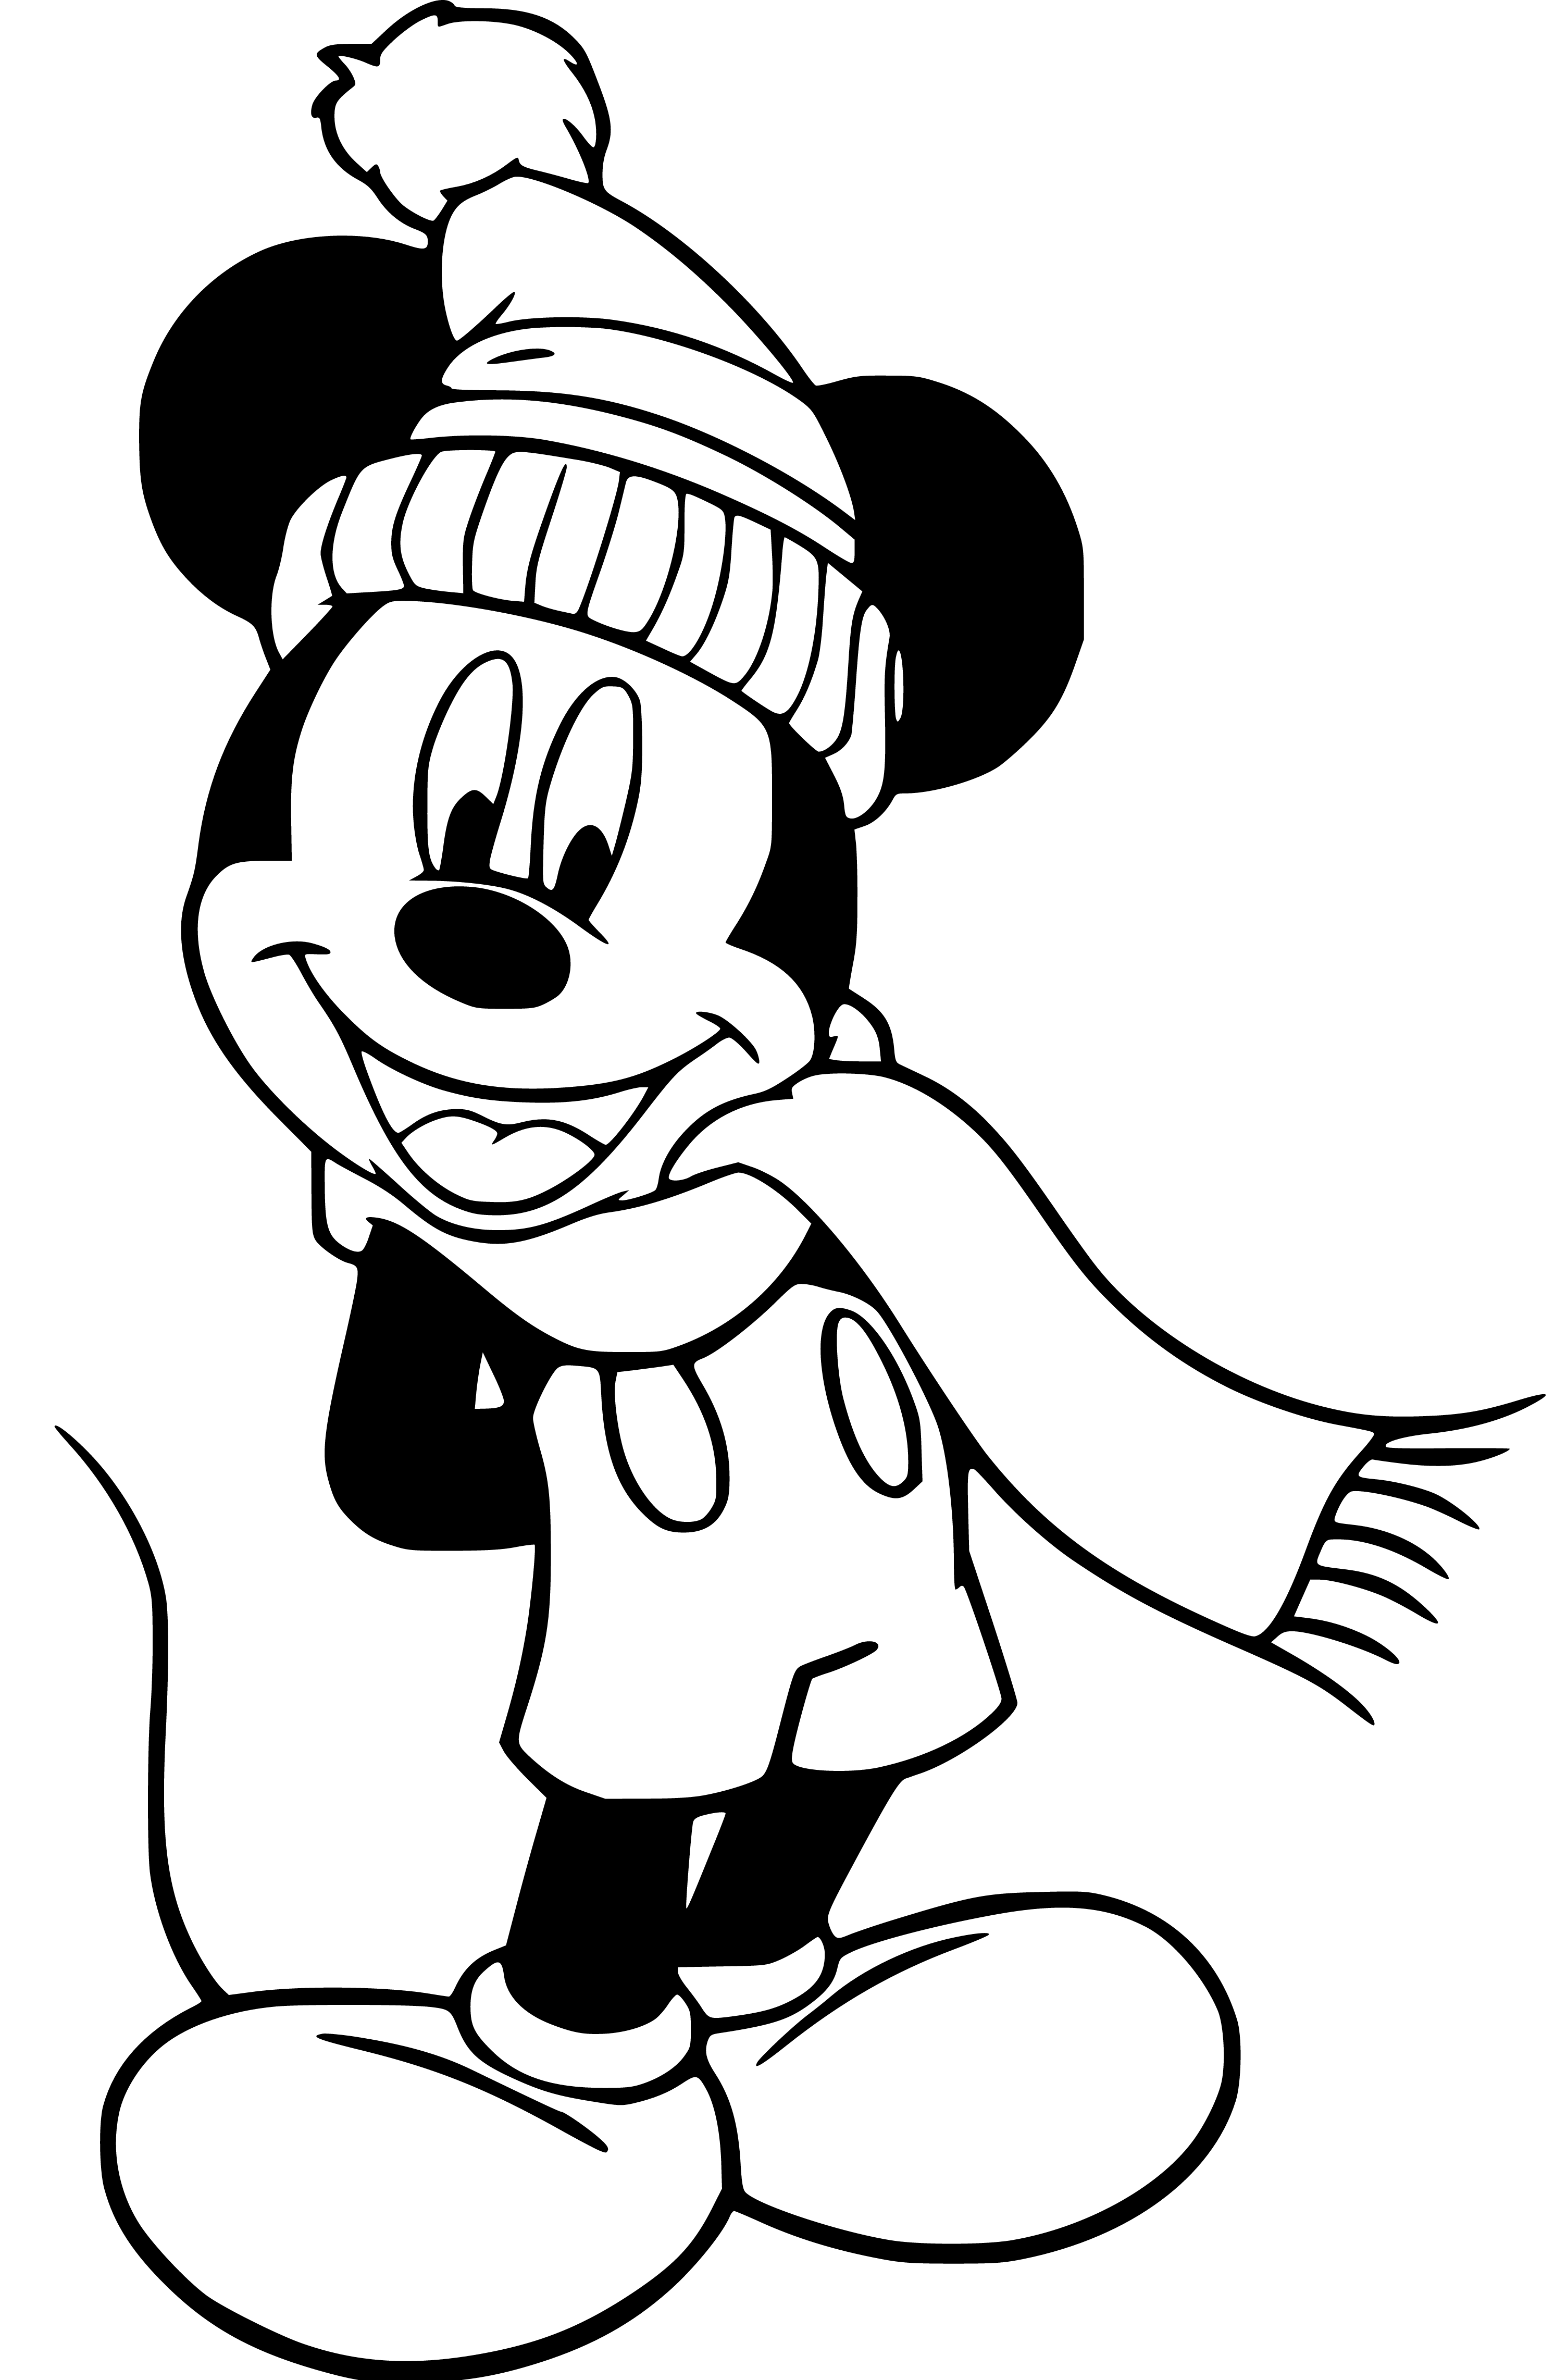 Printable Mickey drawing Coloring Page for kids.